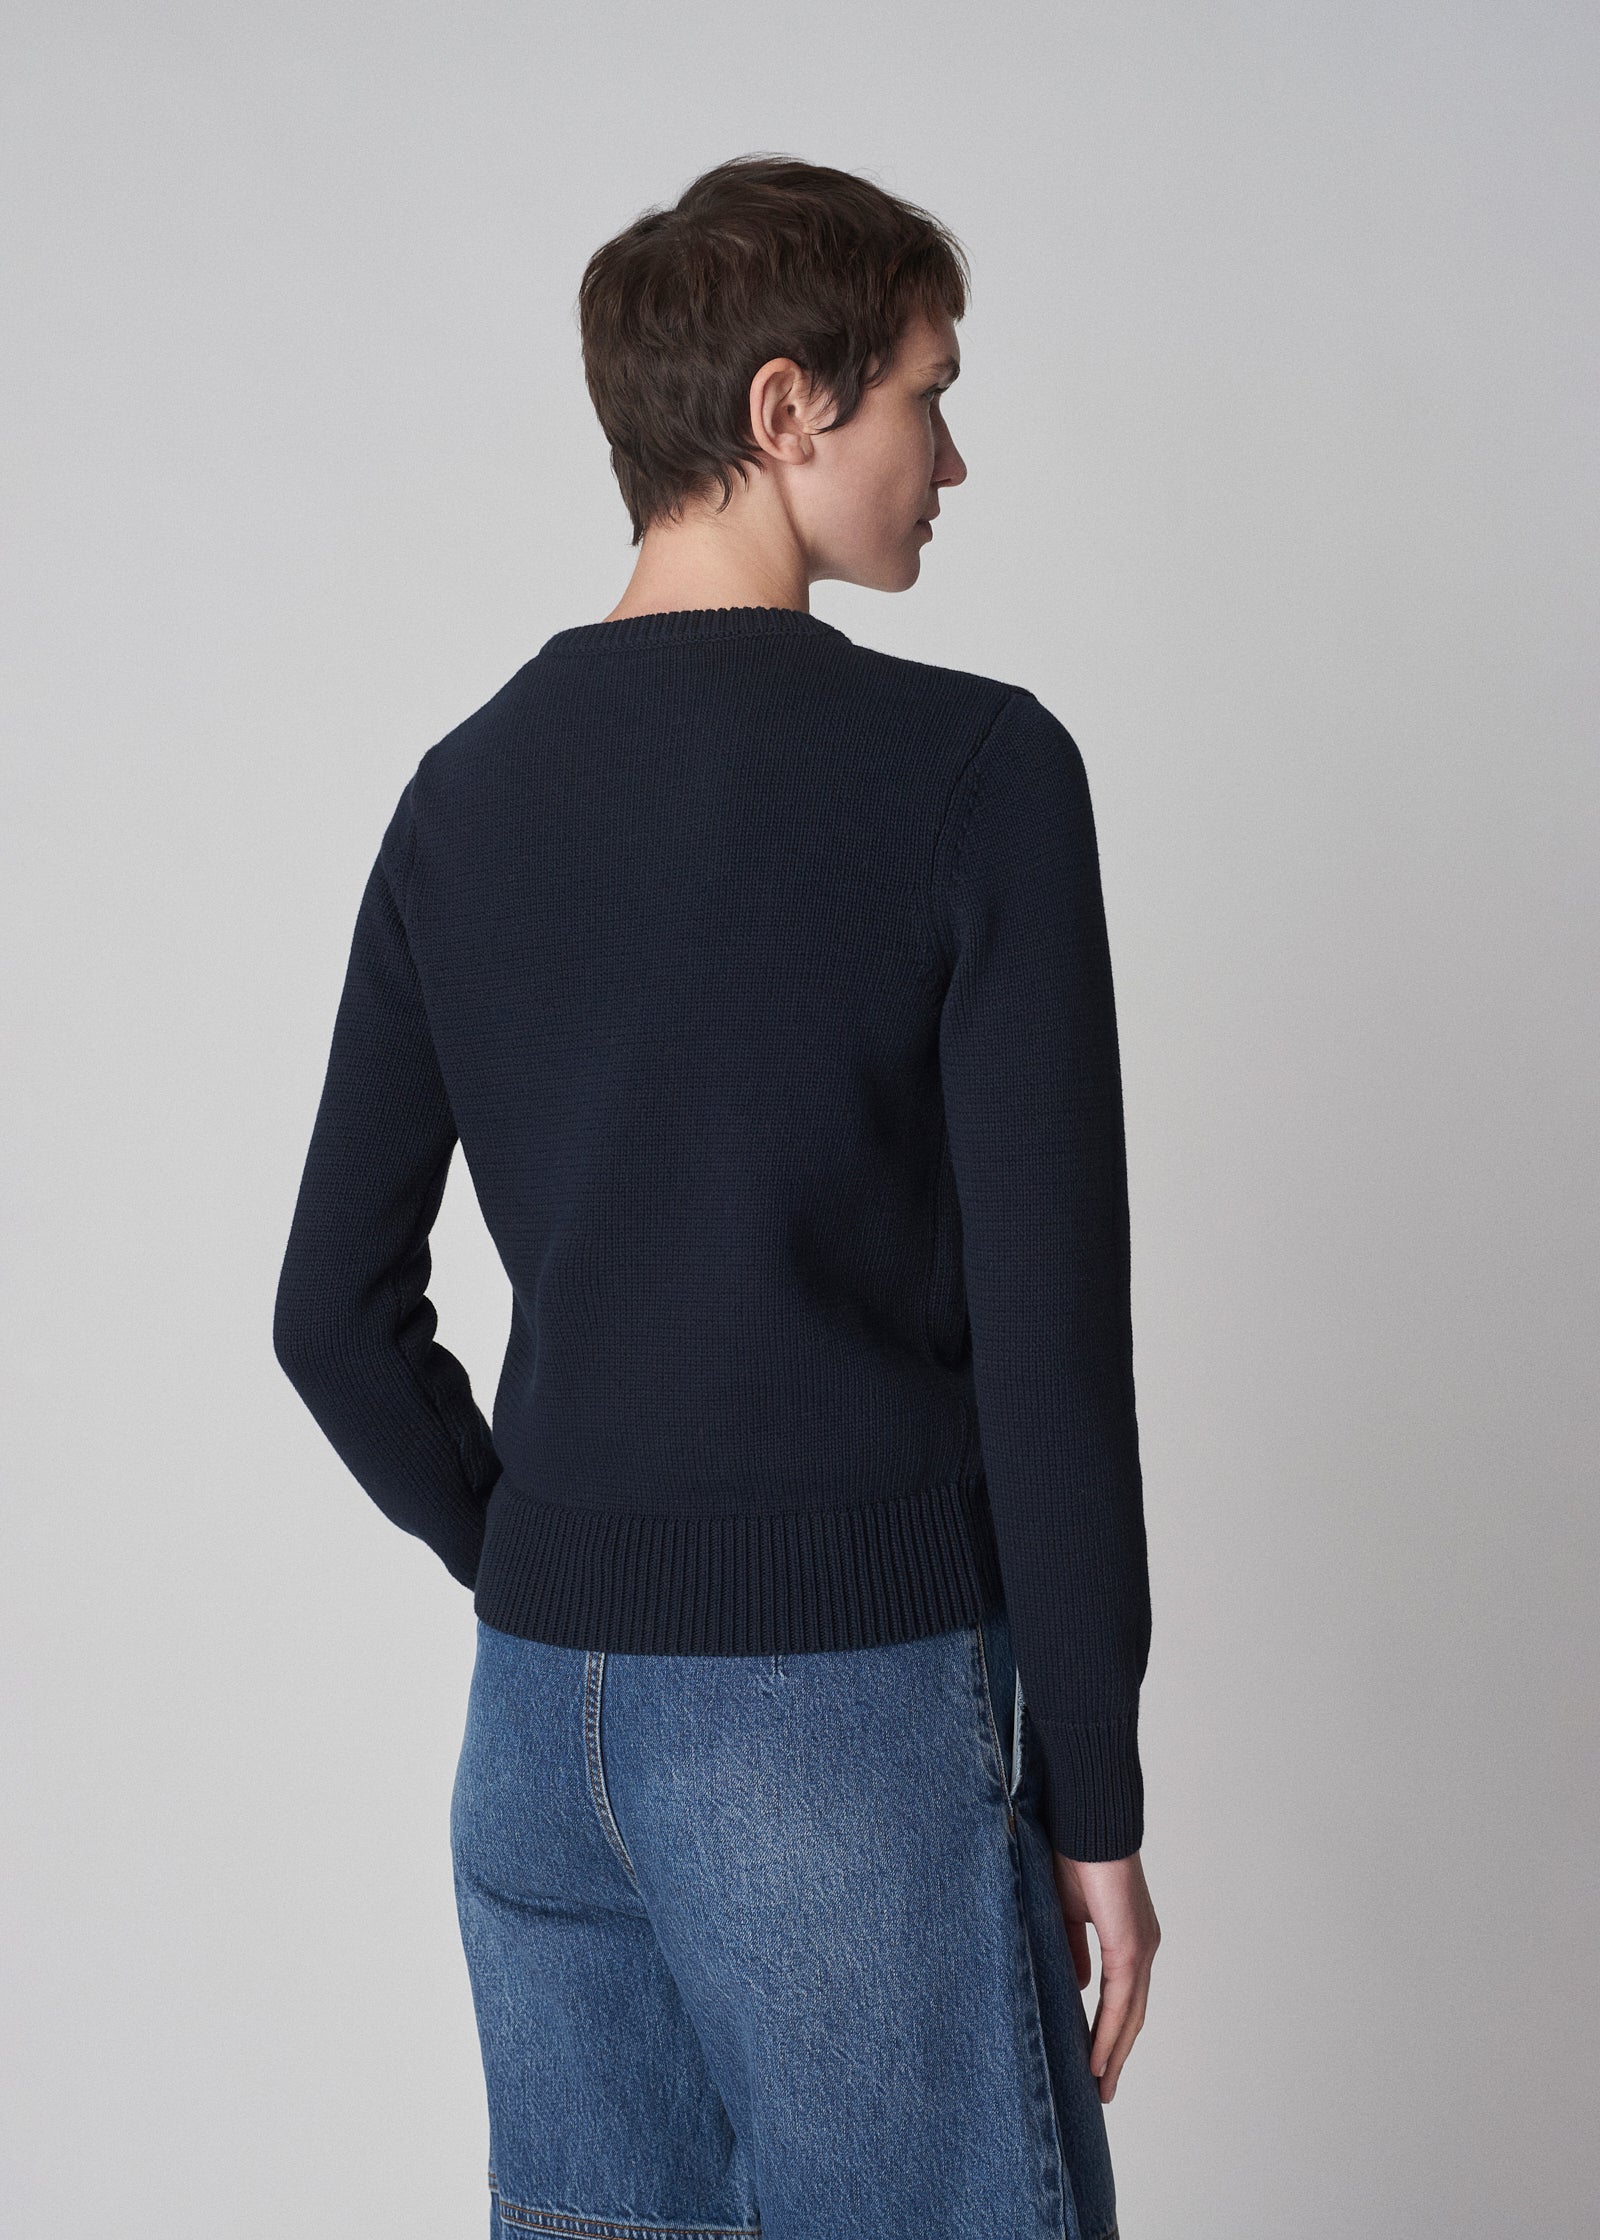 Classic Crew in Cotton Knit - Navy - CO Collections